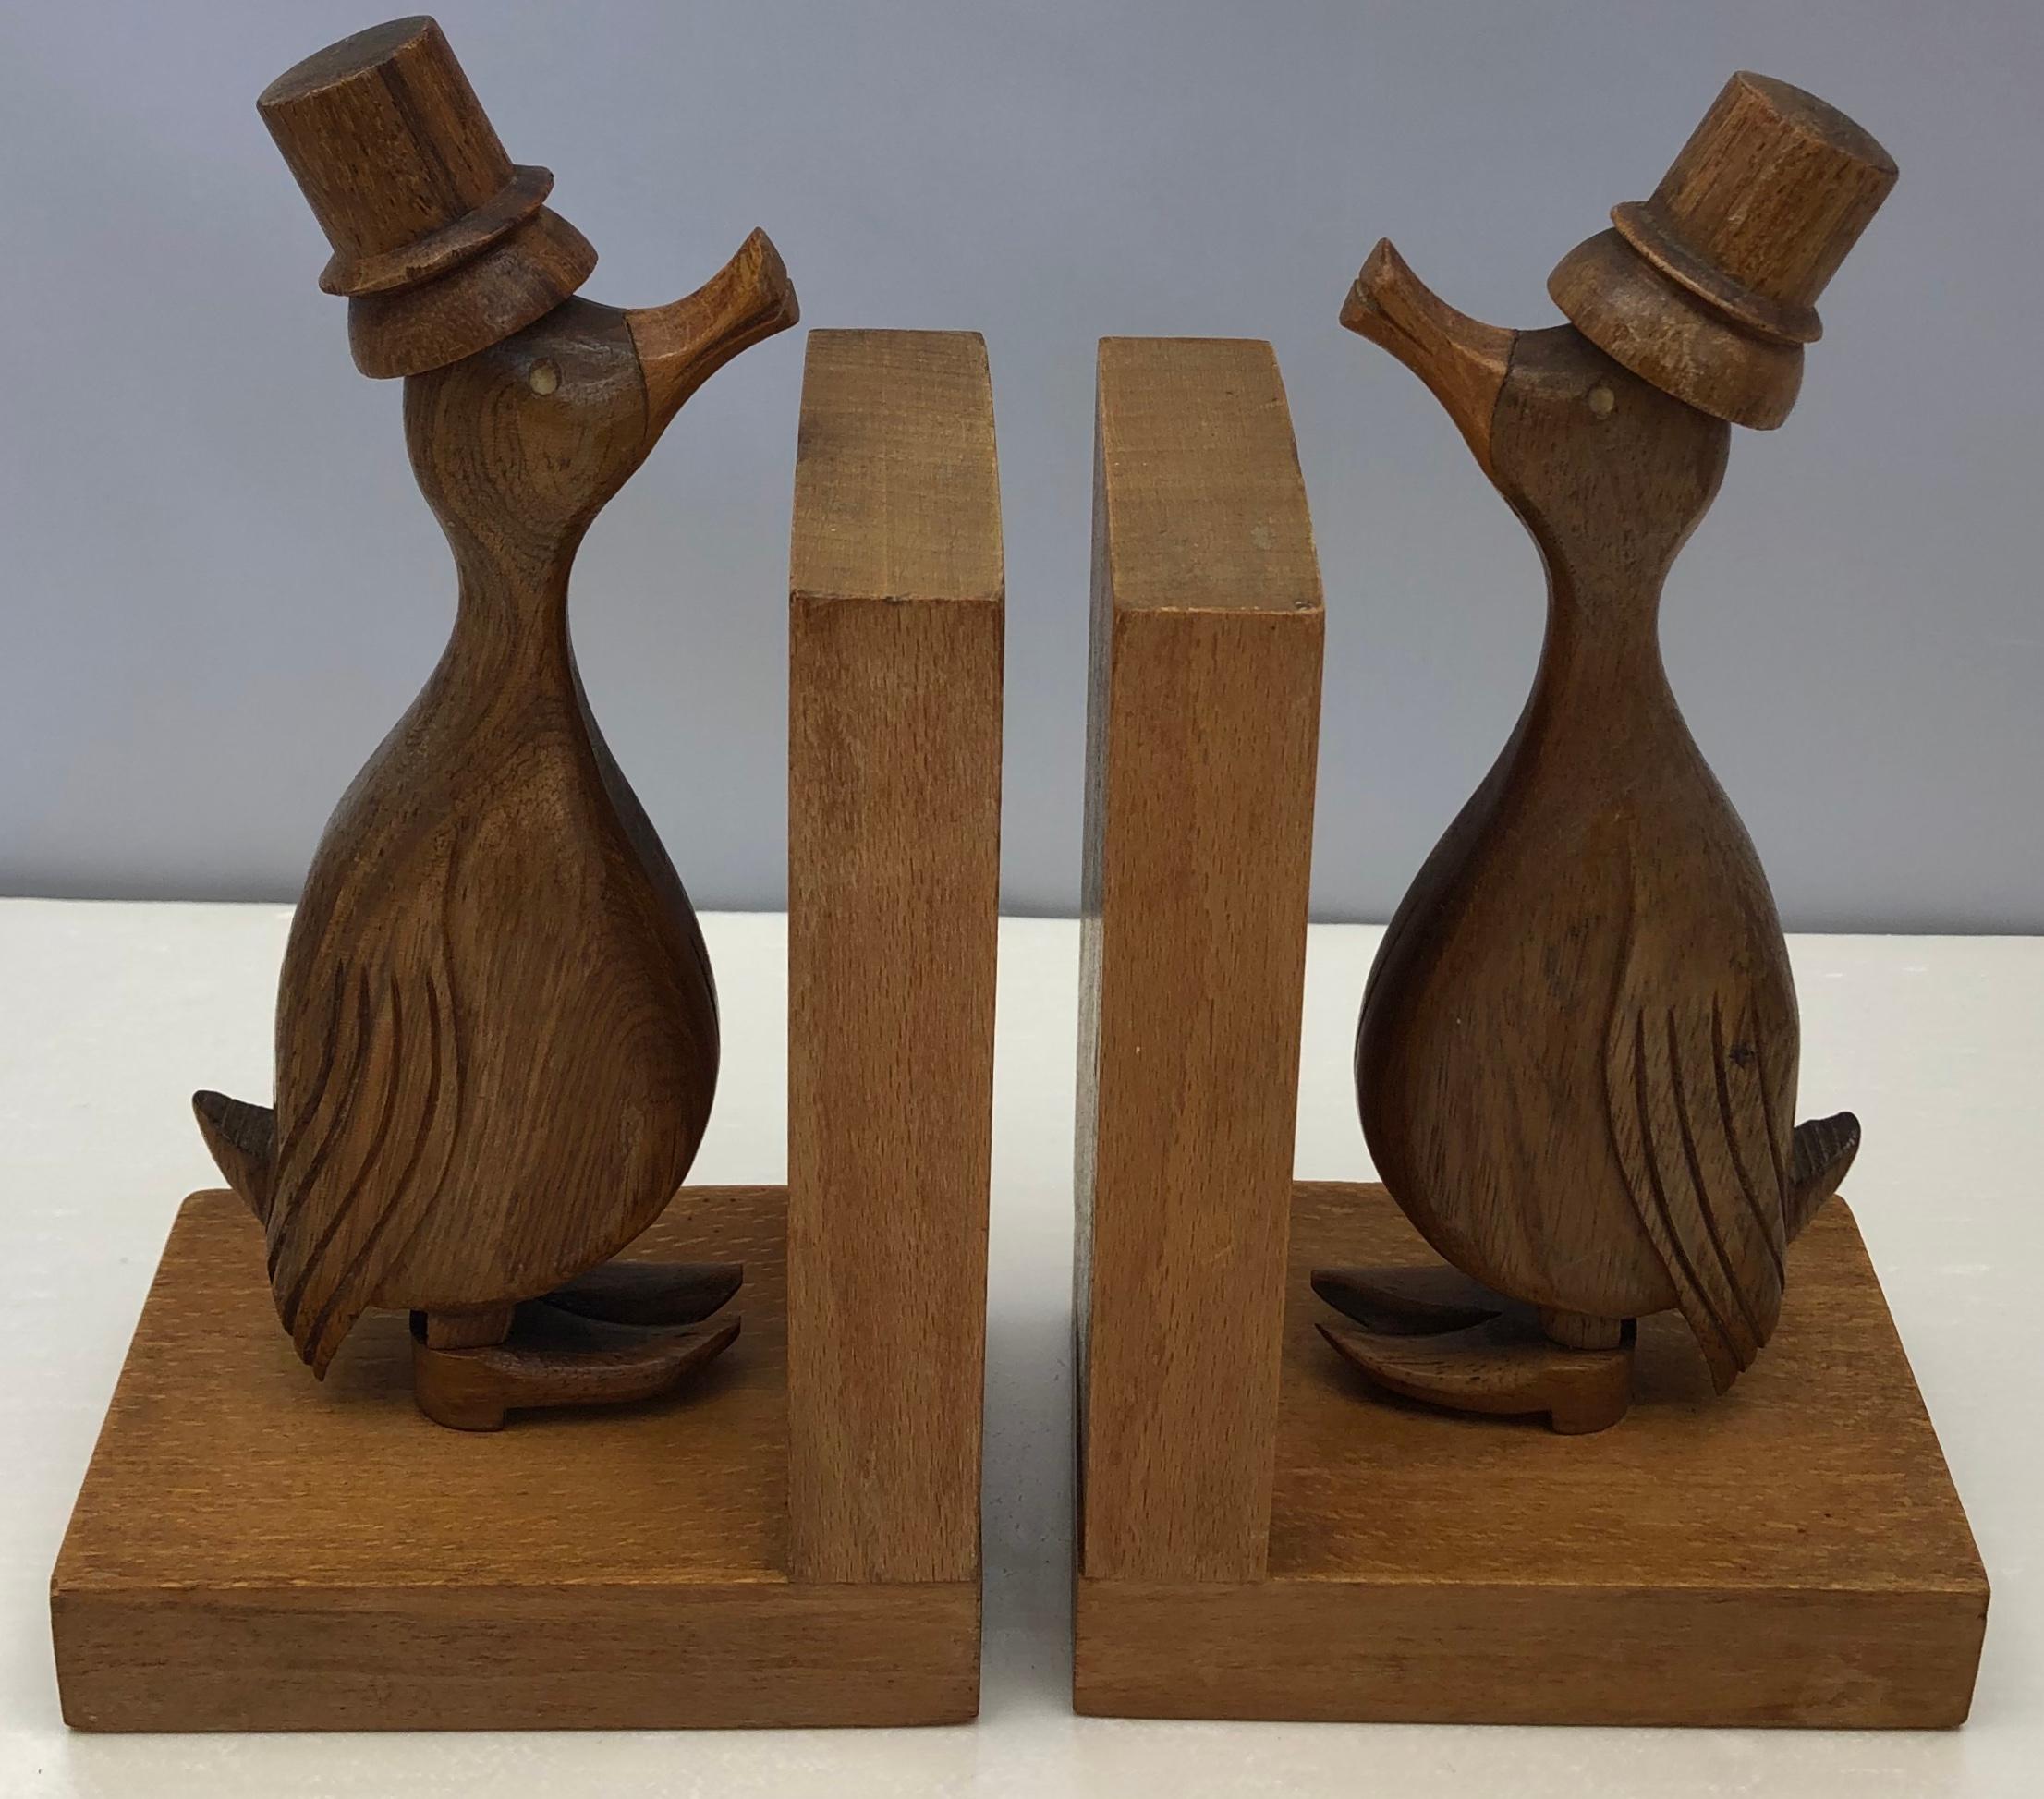 A nice quality pair of French Art Deco period bookends. 

These handcrafted bookends are perfect to display your favorite books on a nightstand, mantel, dresser or shelf. Made with all natural walnut wood. 

Fun design that will enhance any shelf,